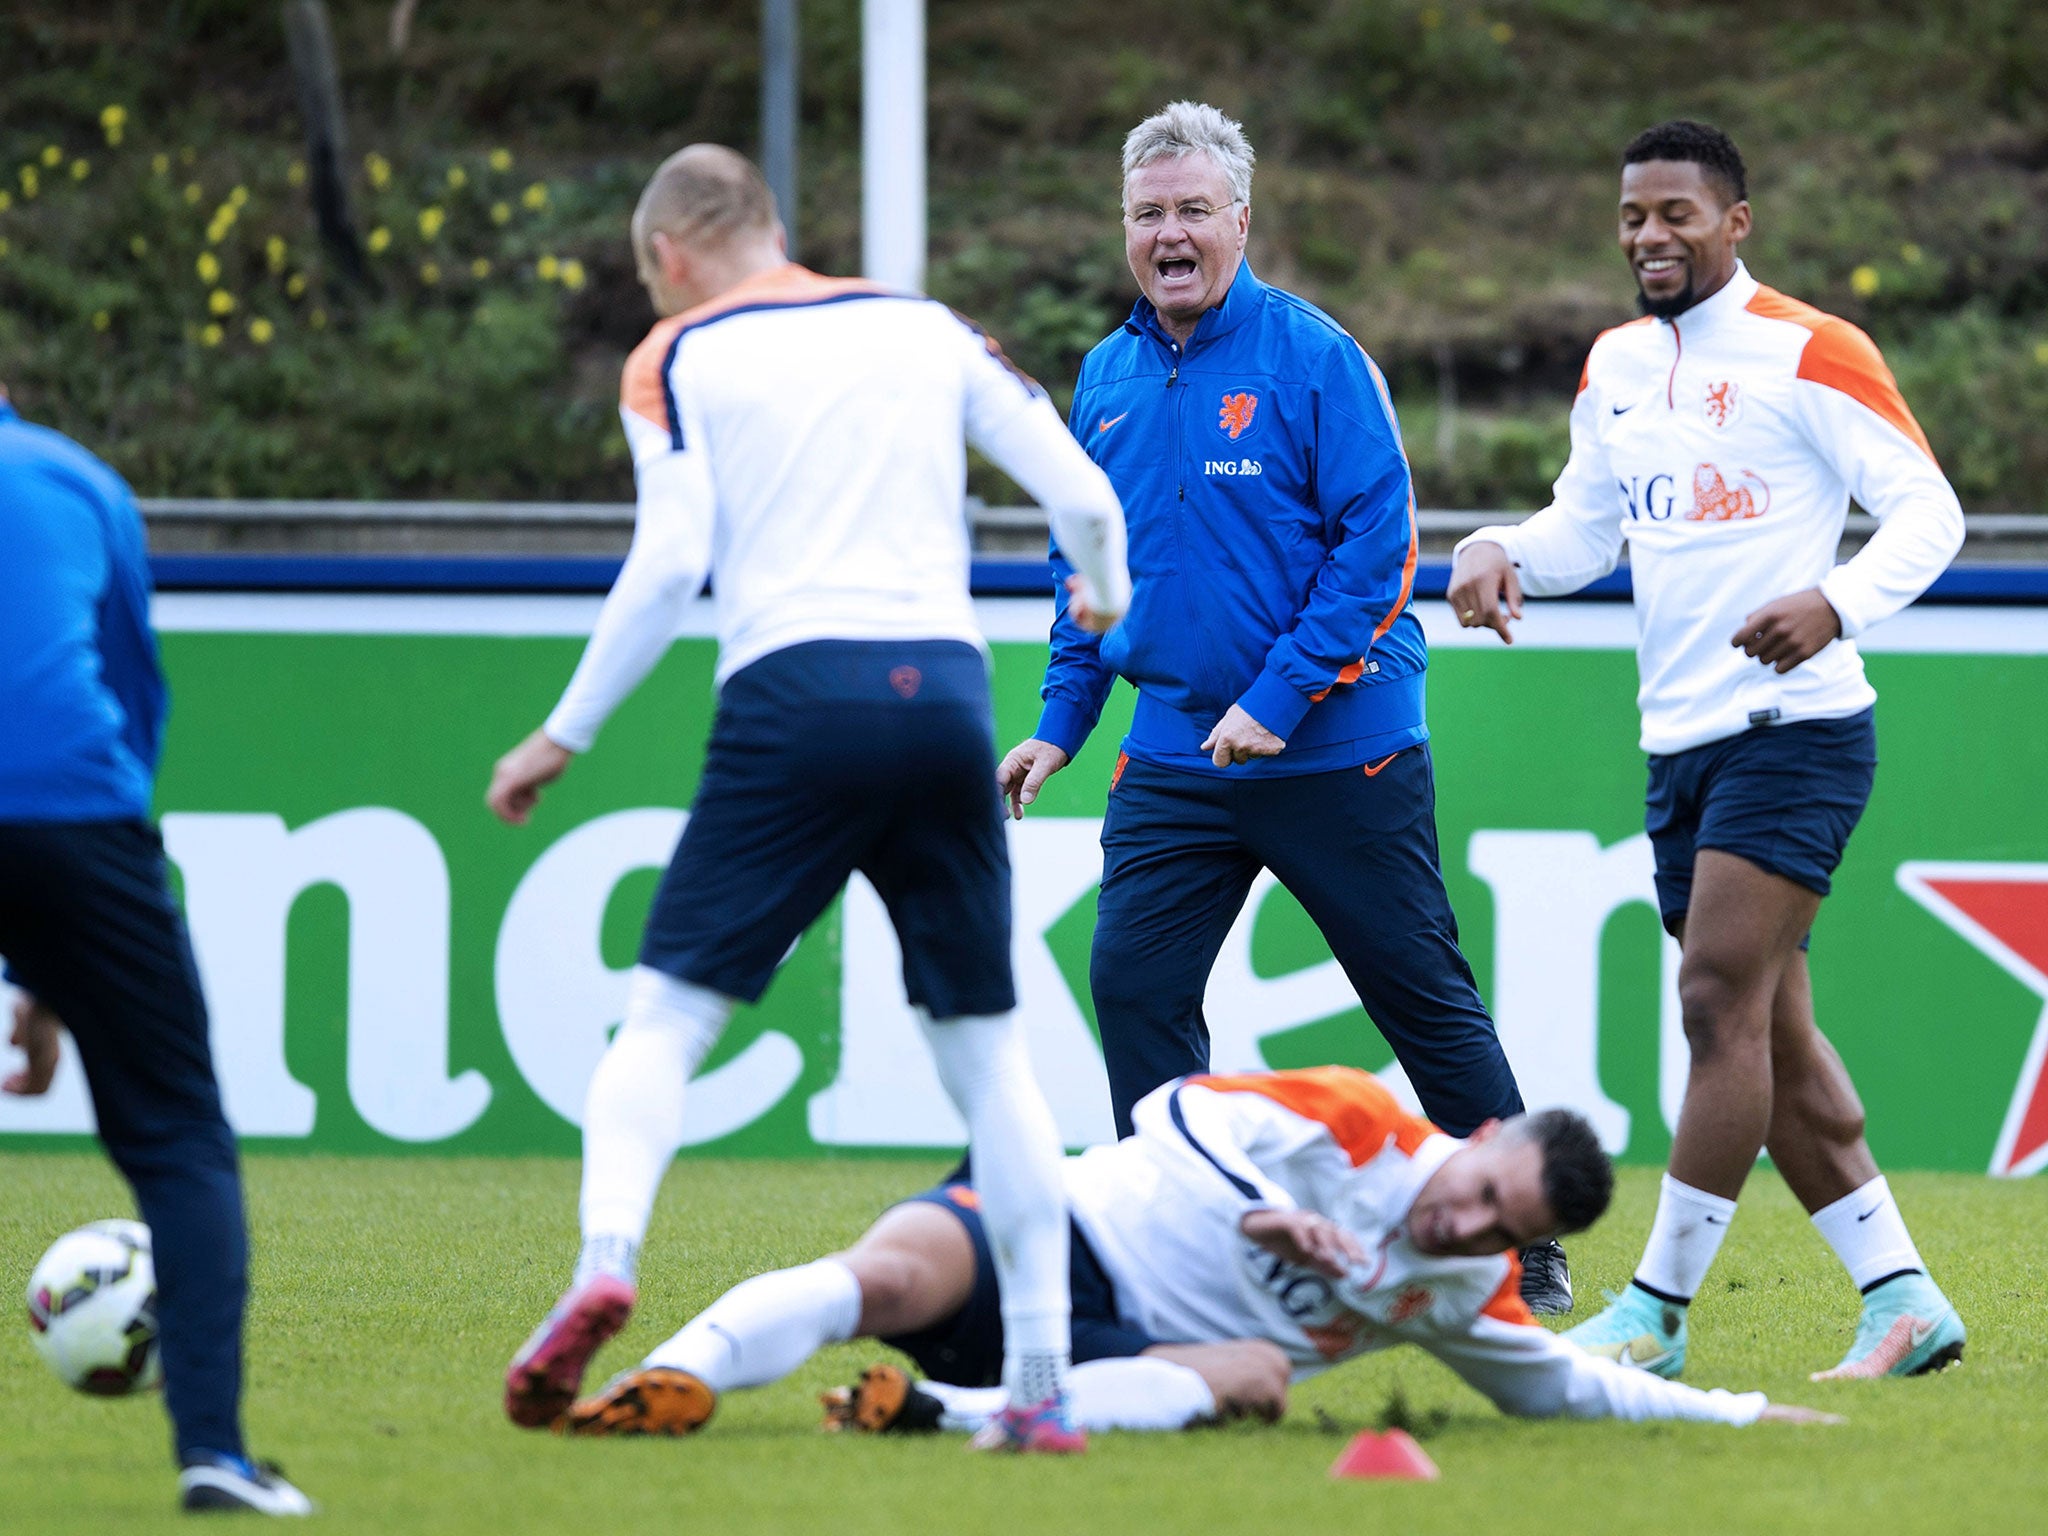 Hiddink lasted just 10 games with the Netherlands in his second spell